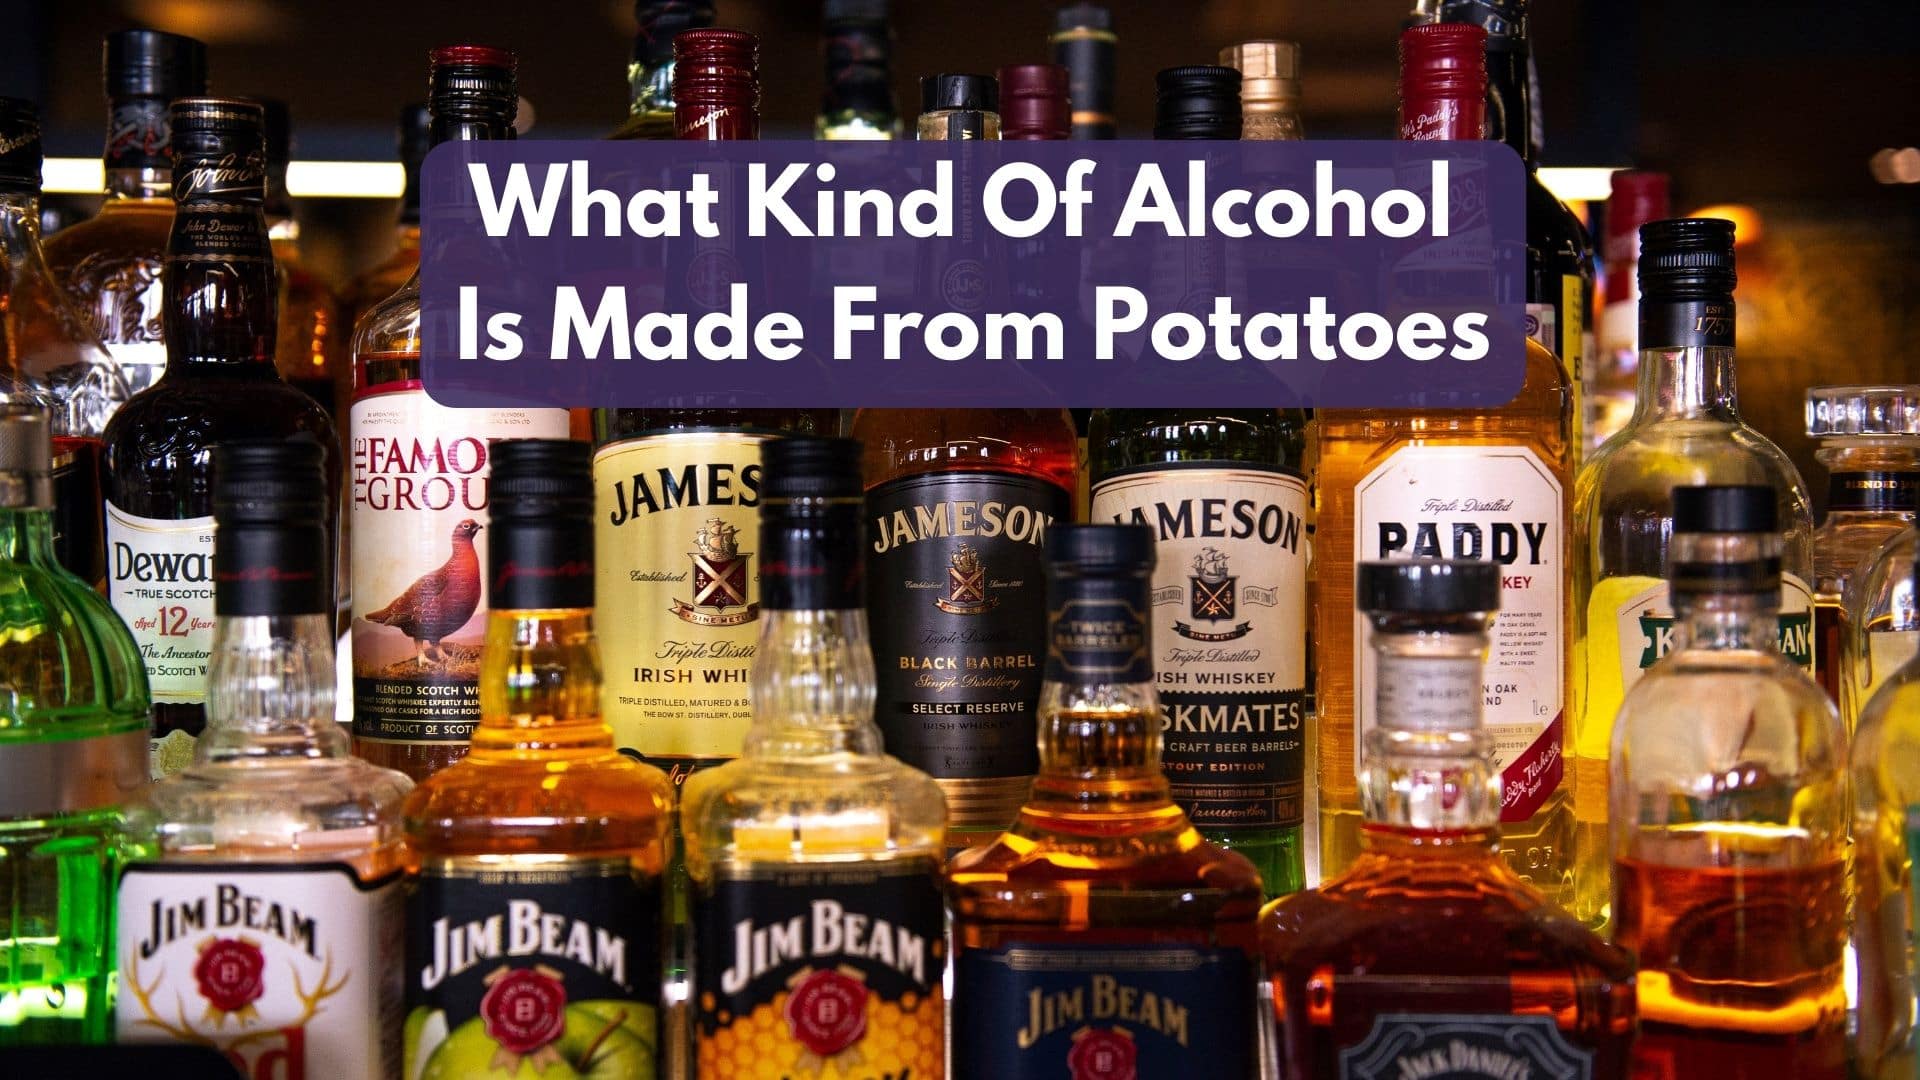 What Kind Of Alcohol Is Made From Potatoes?